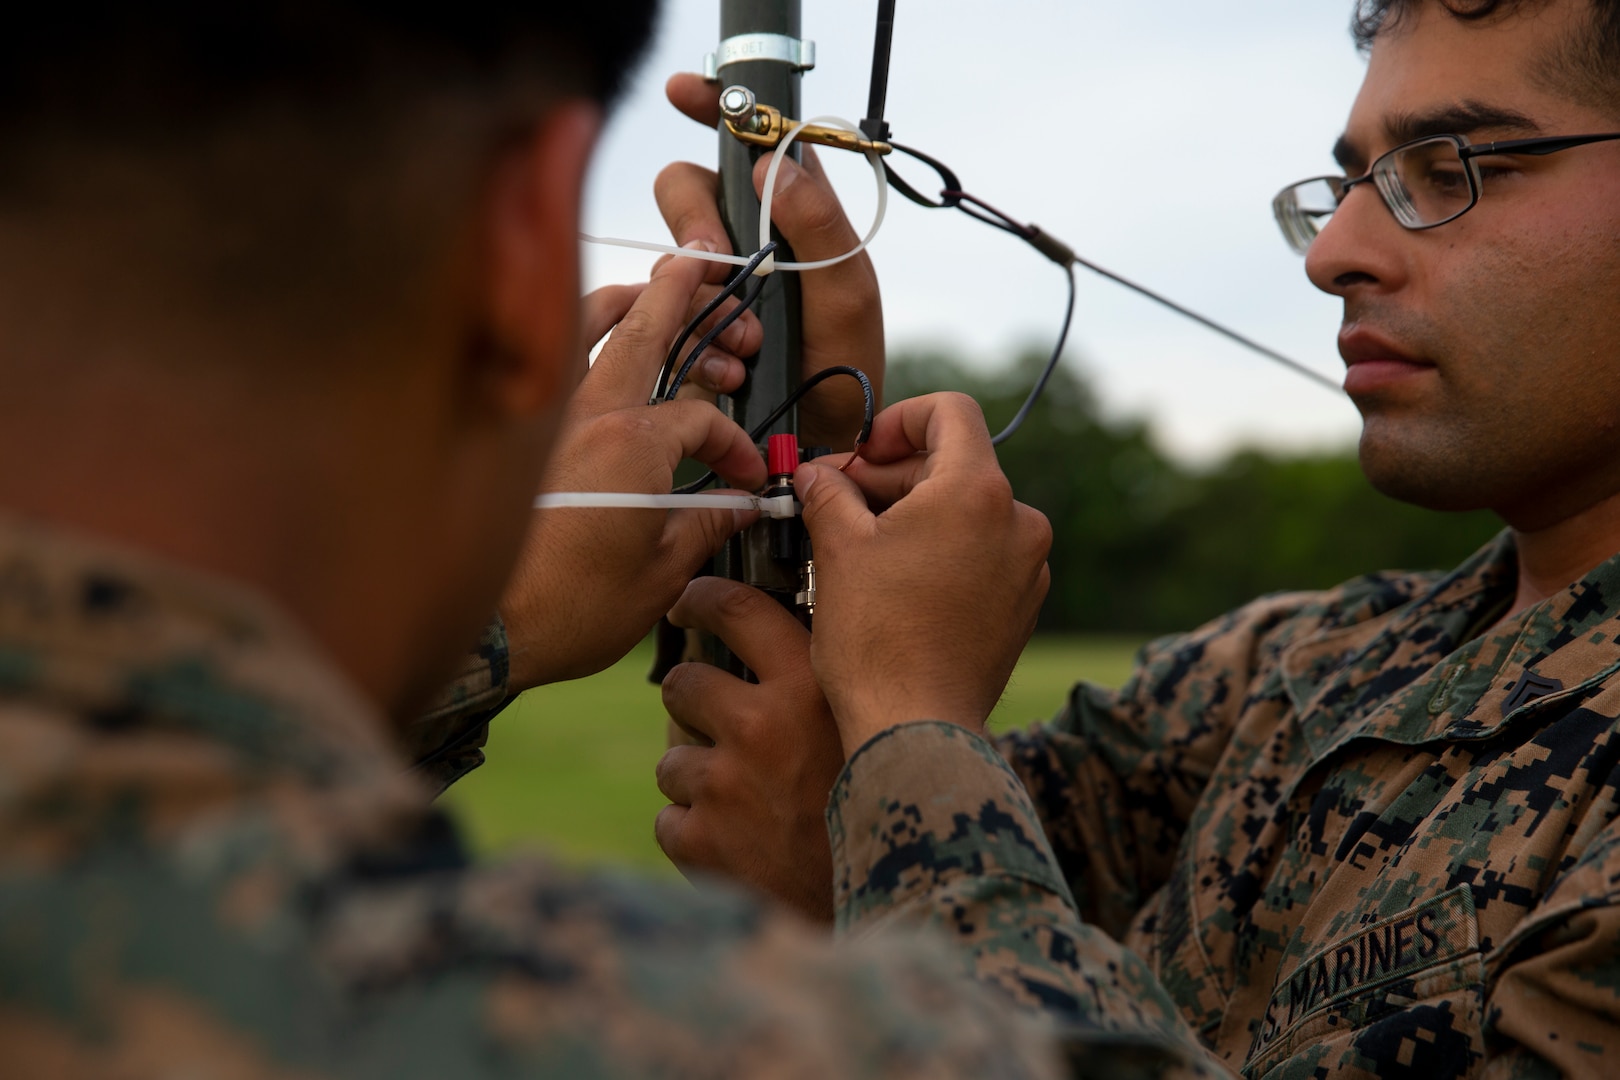 U.S. Marine transmissions system operators with 10th Marine Regiment, 2d Marine Division (MARDIV), set up a Dipole antenna as part of the 2d MARDIV High-Frequency (HF) Competition at Camp Pendleton, Va., July 13, 2021. The competition enhanced HF transmission proficiency and capabilities to prepare Marines for future expeditionary conflicts where the area is either contested or degraded. (U.S. Marine Corps photo by Pfc. Sarah Pysher)